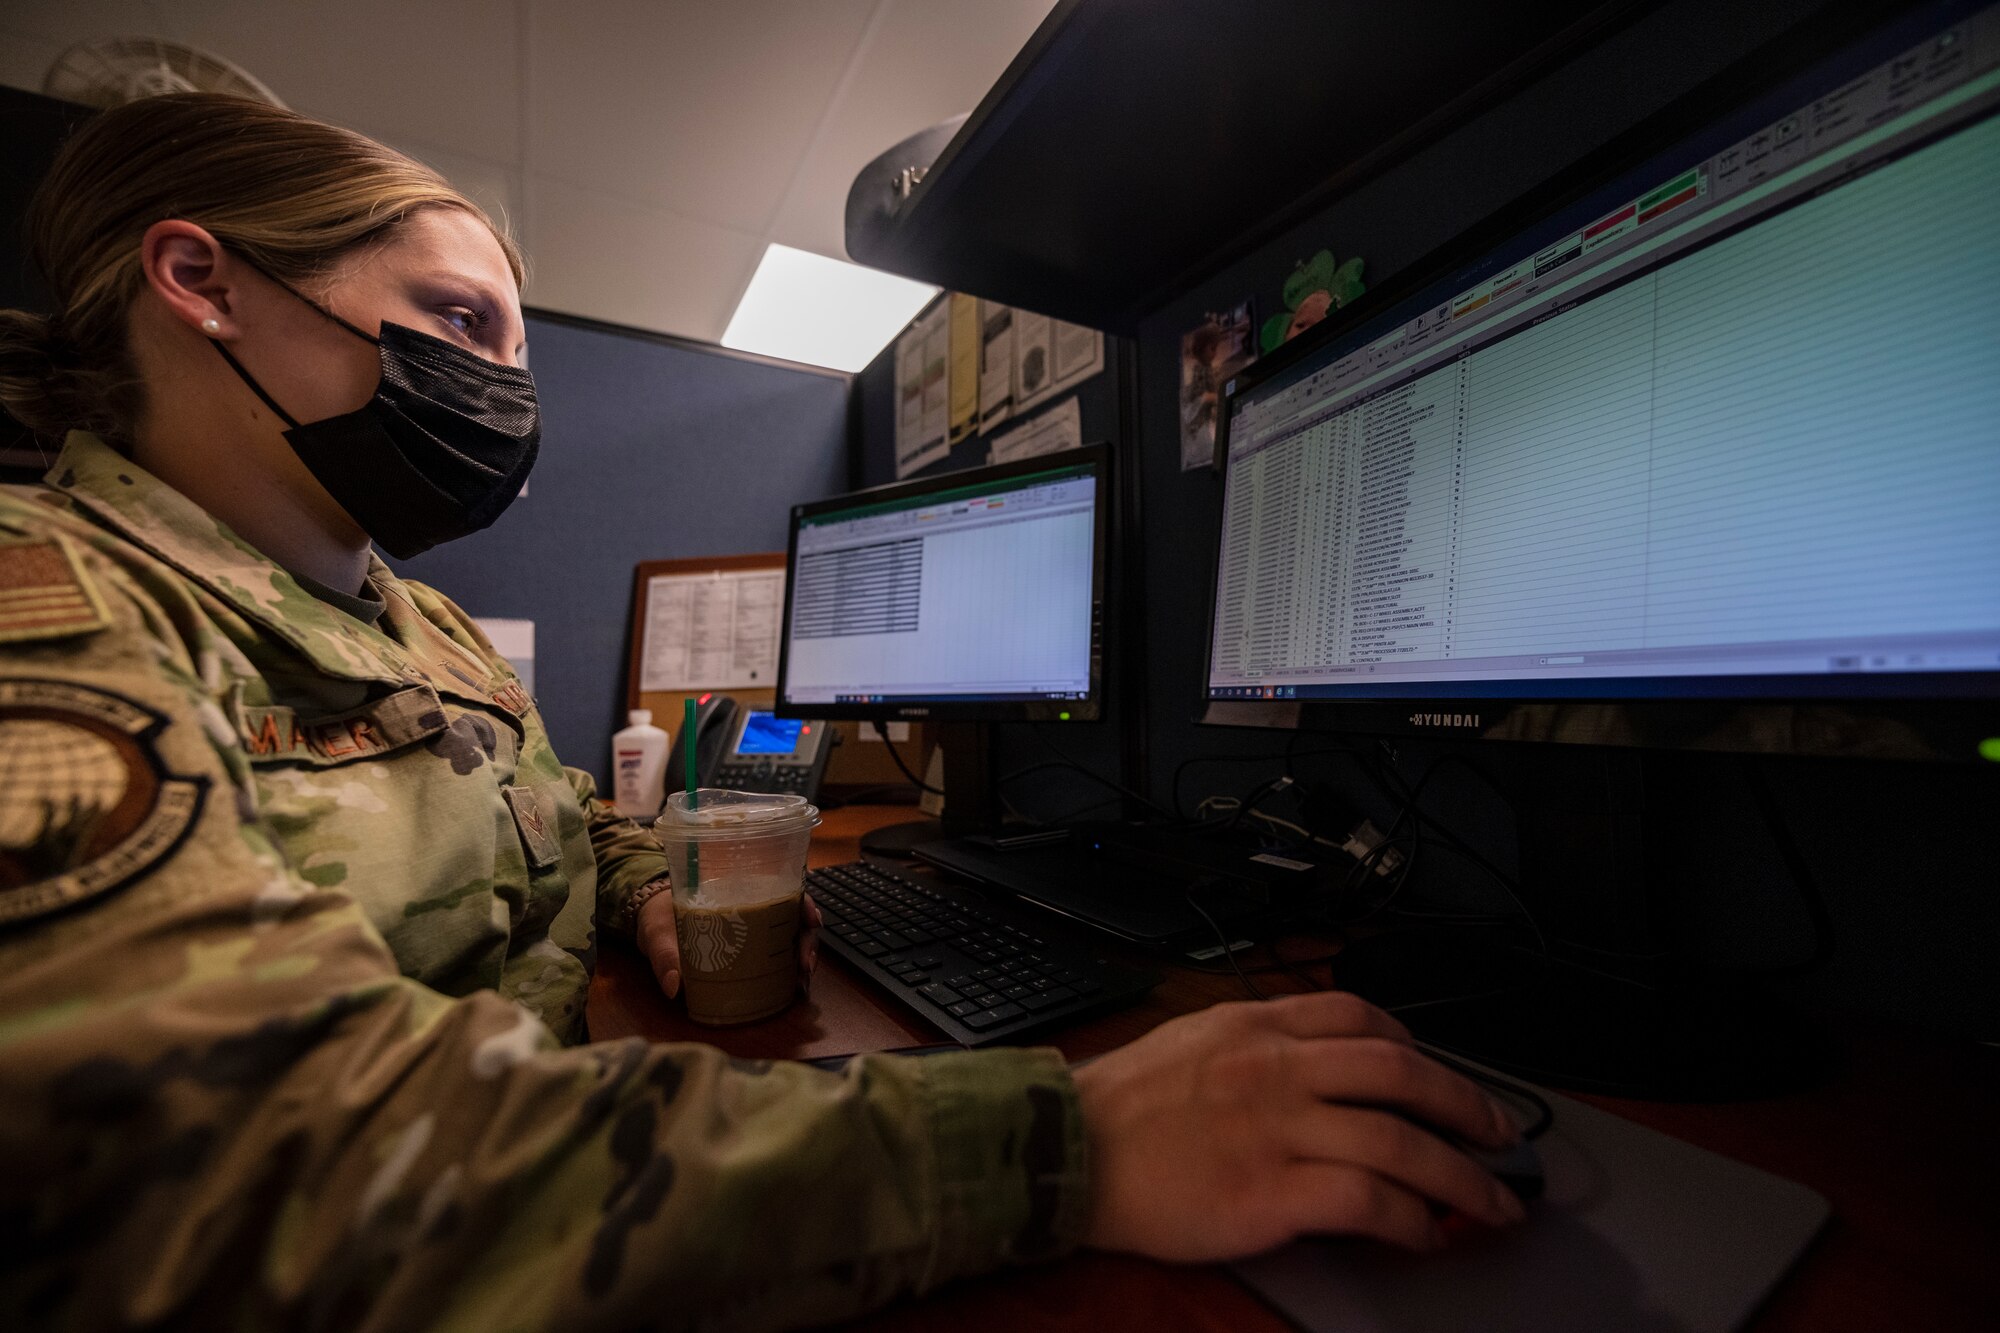 A female Airman works at her desk.